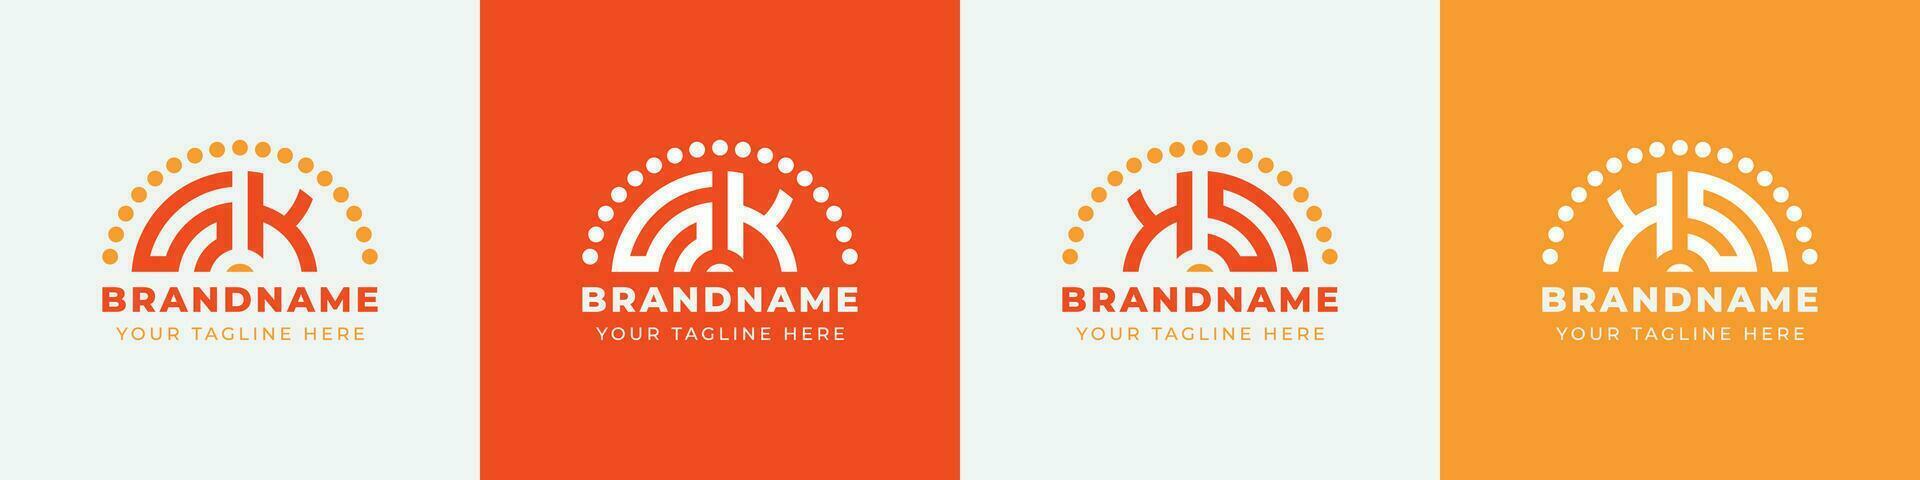 Letter KS and SK Sunrise  Logo Set, suitable for any business with KS or SK initials. vector